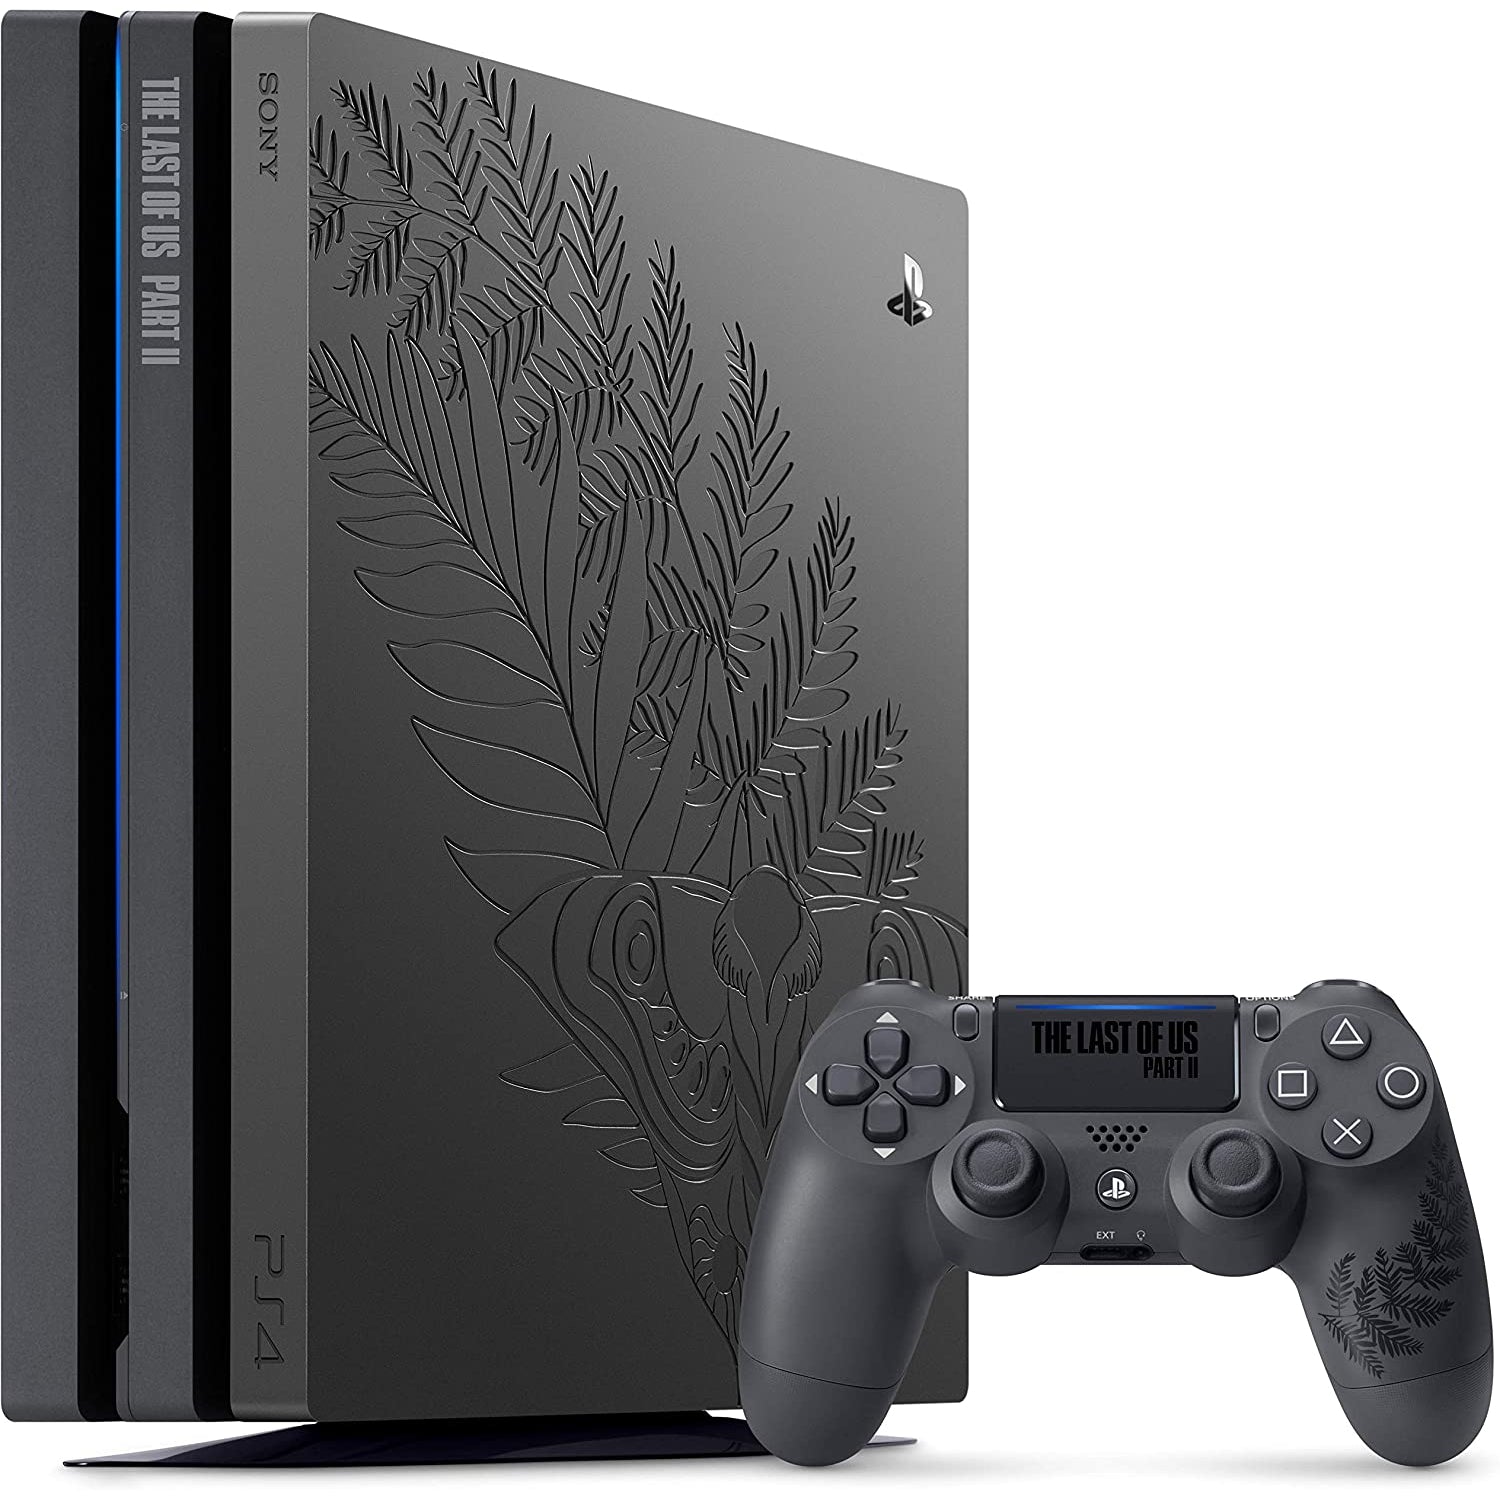 Sony PlayStation 4 Pro Console - The Last of Us Part II Edition (1TB)